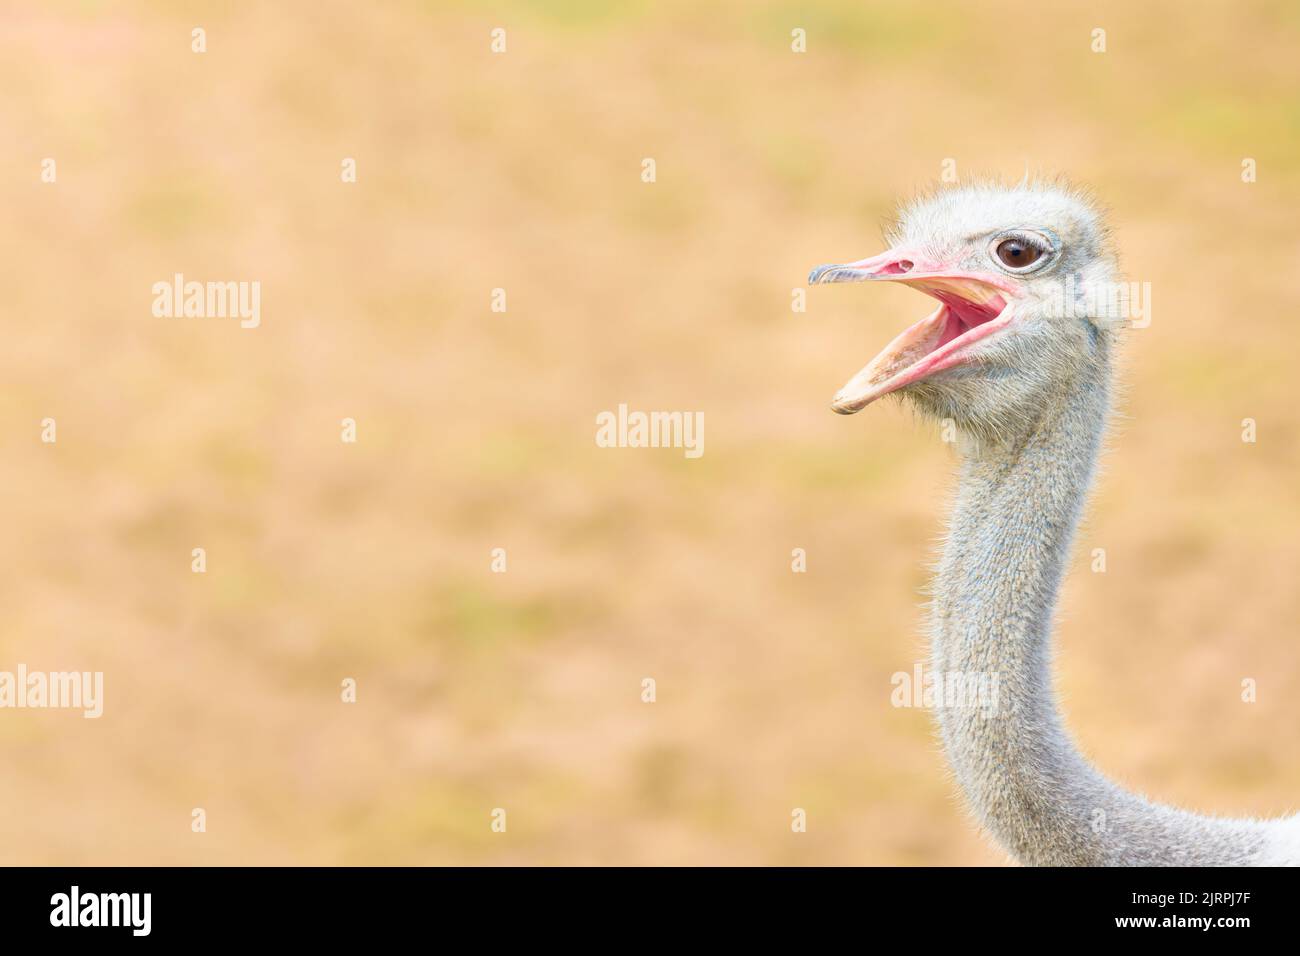 Close up of funny ostrich head and neck with open beak, looking at camera with  laughing or smiling expression. Stock Photo